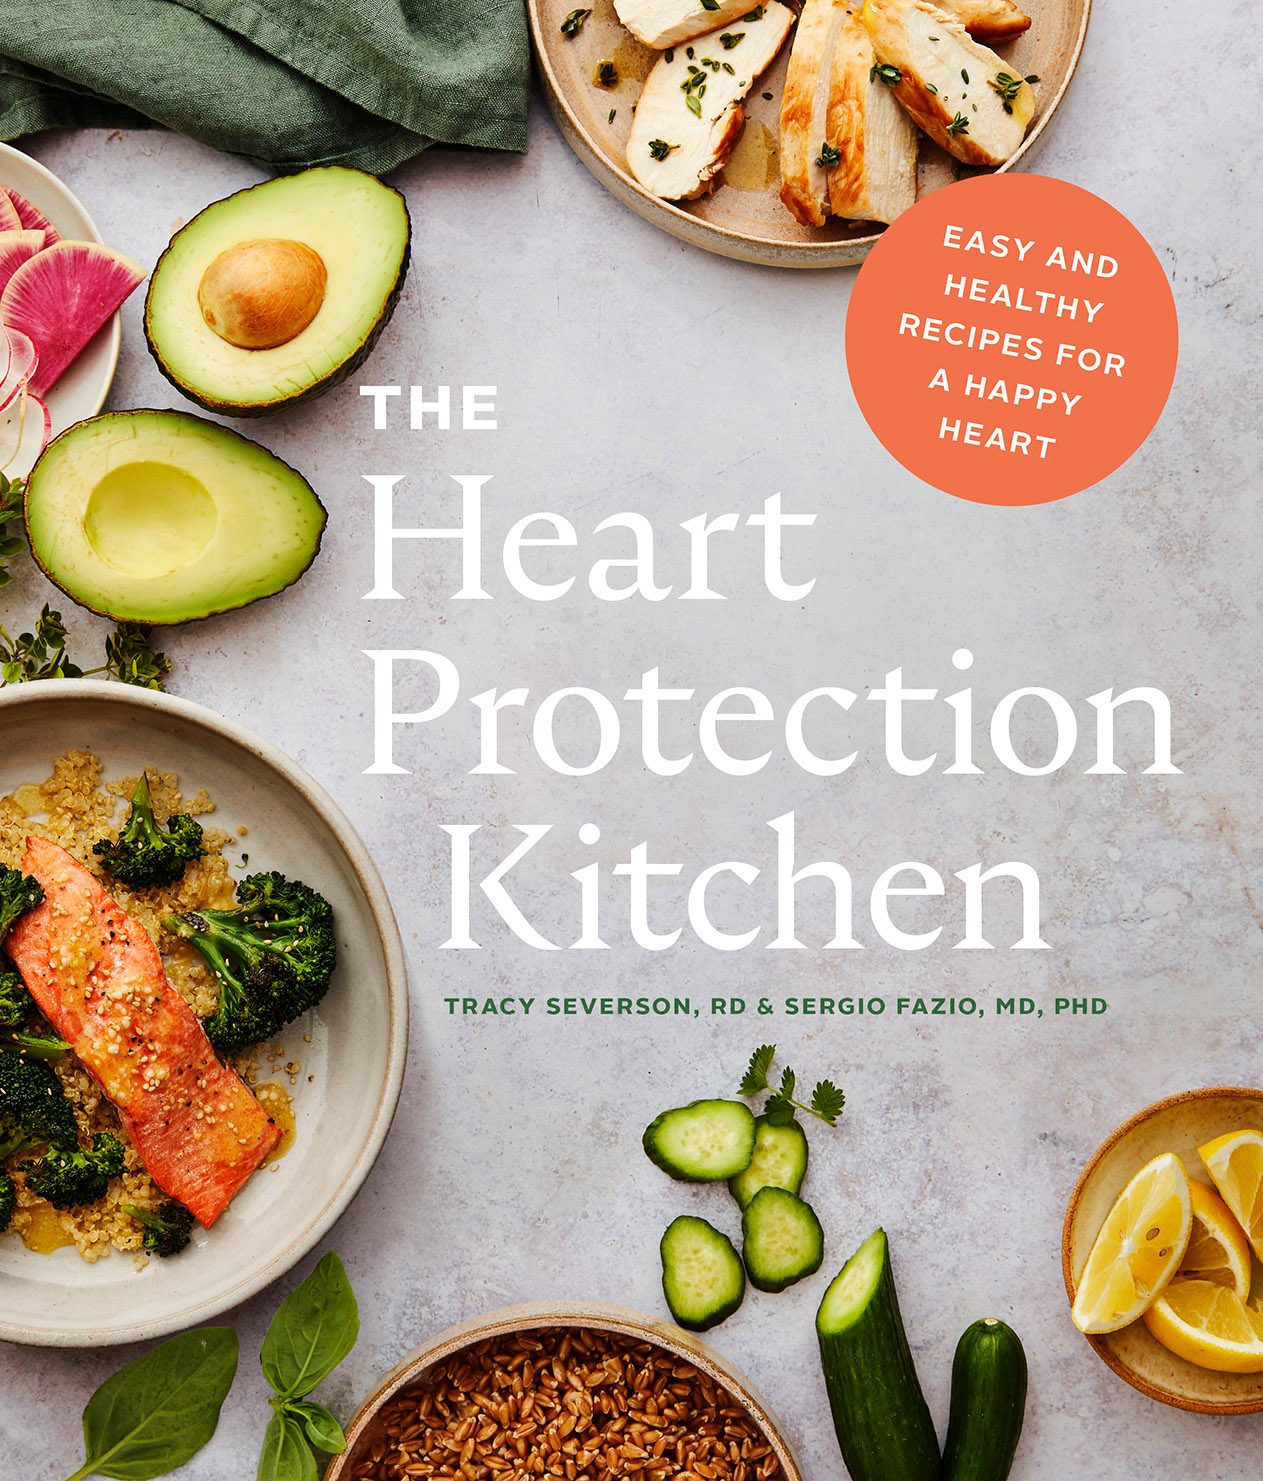 Heart Protection Kitchen, The